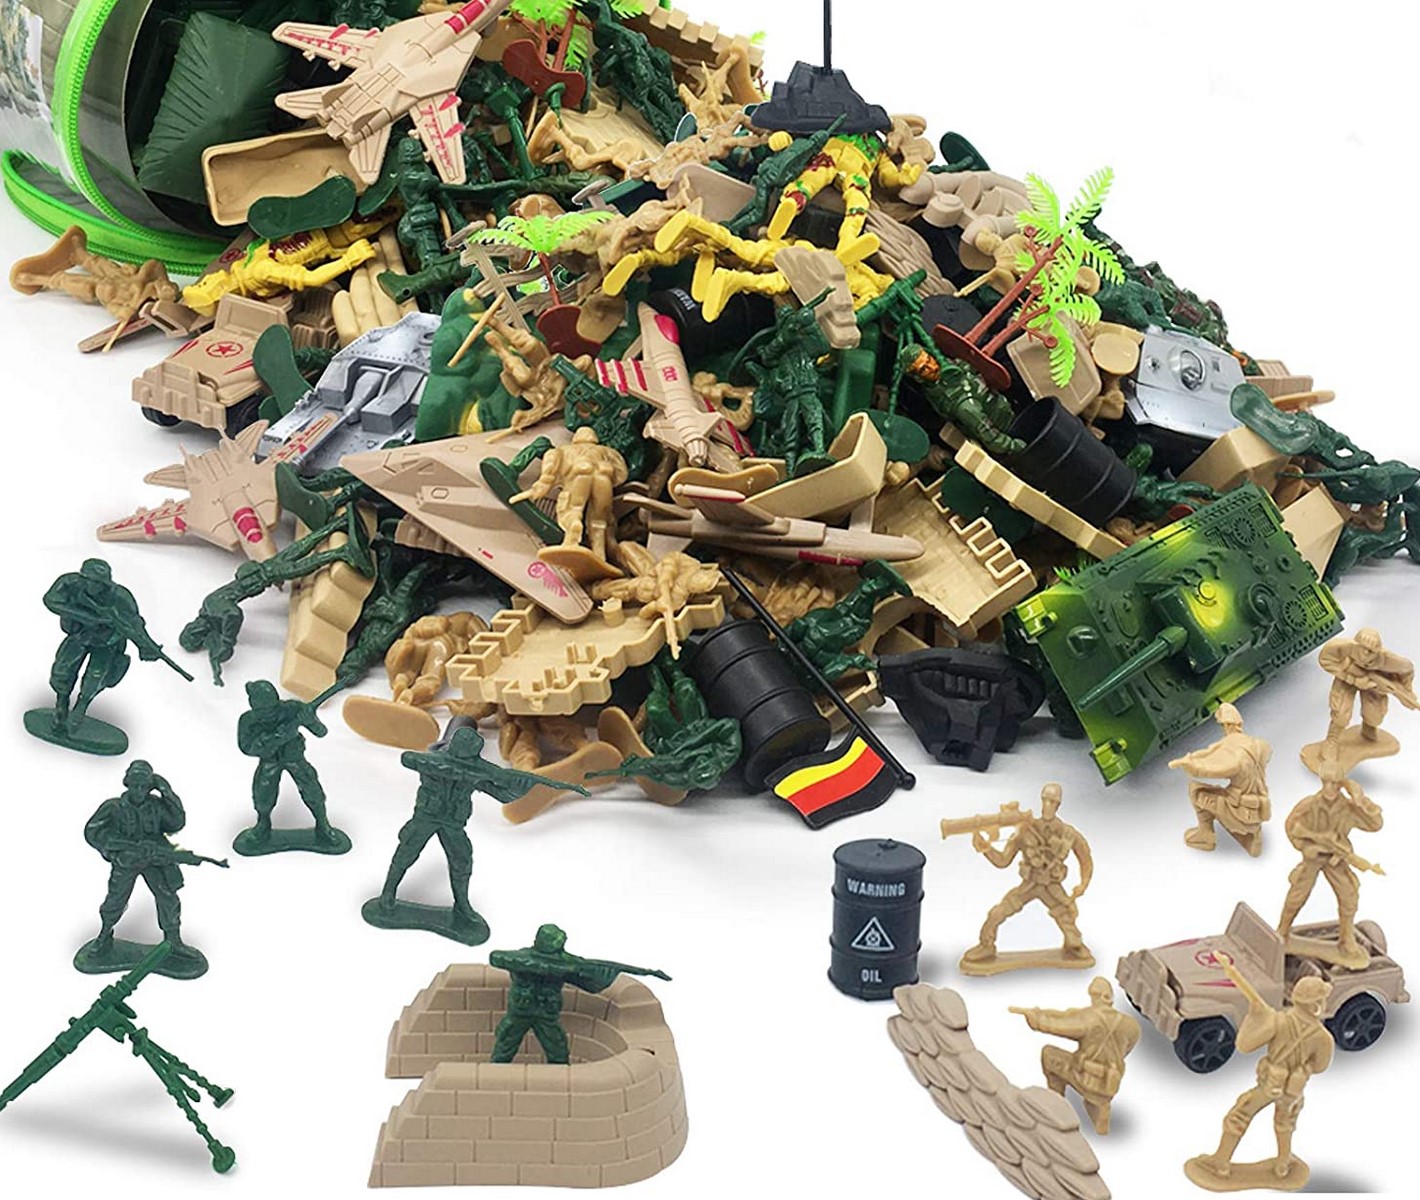 Cool Army Toys Gift Ideas for Kids This Coming Holidays